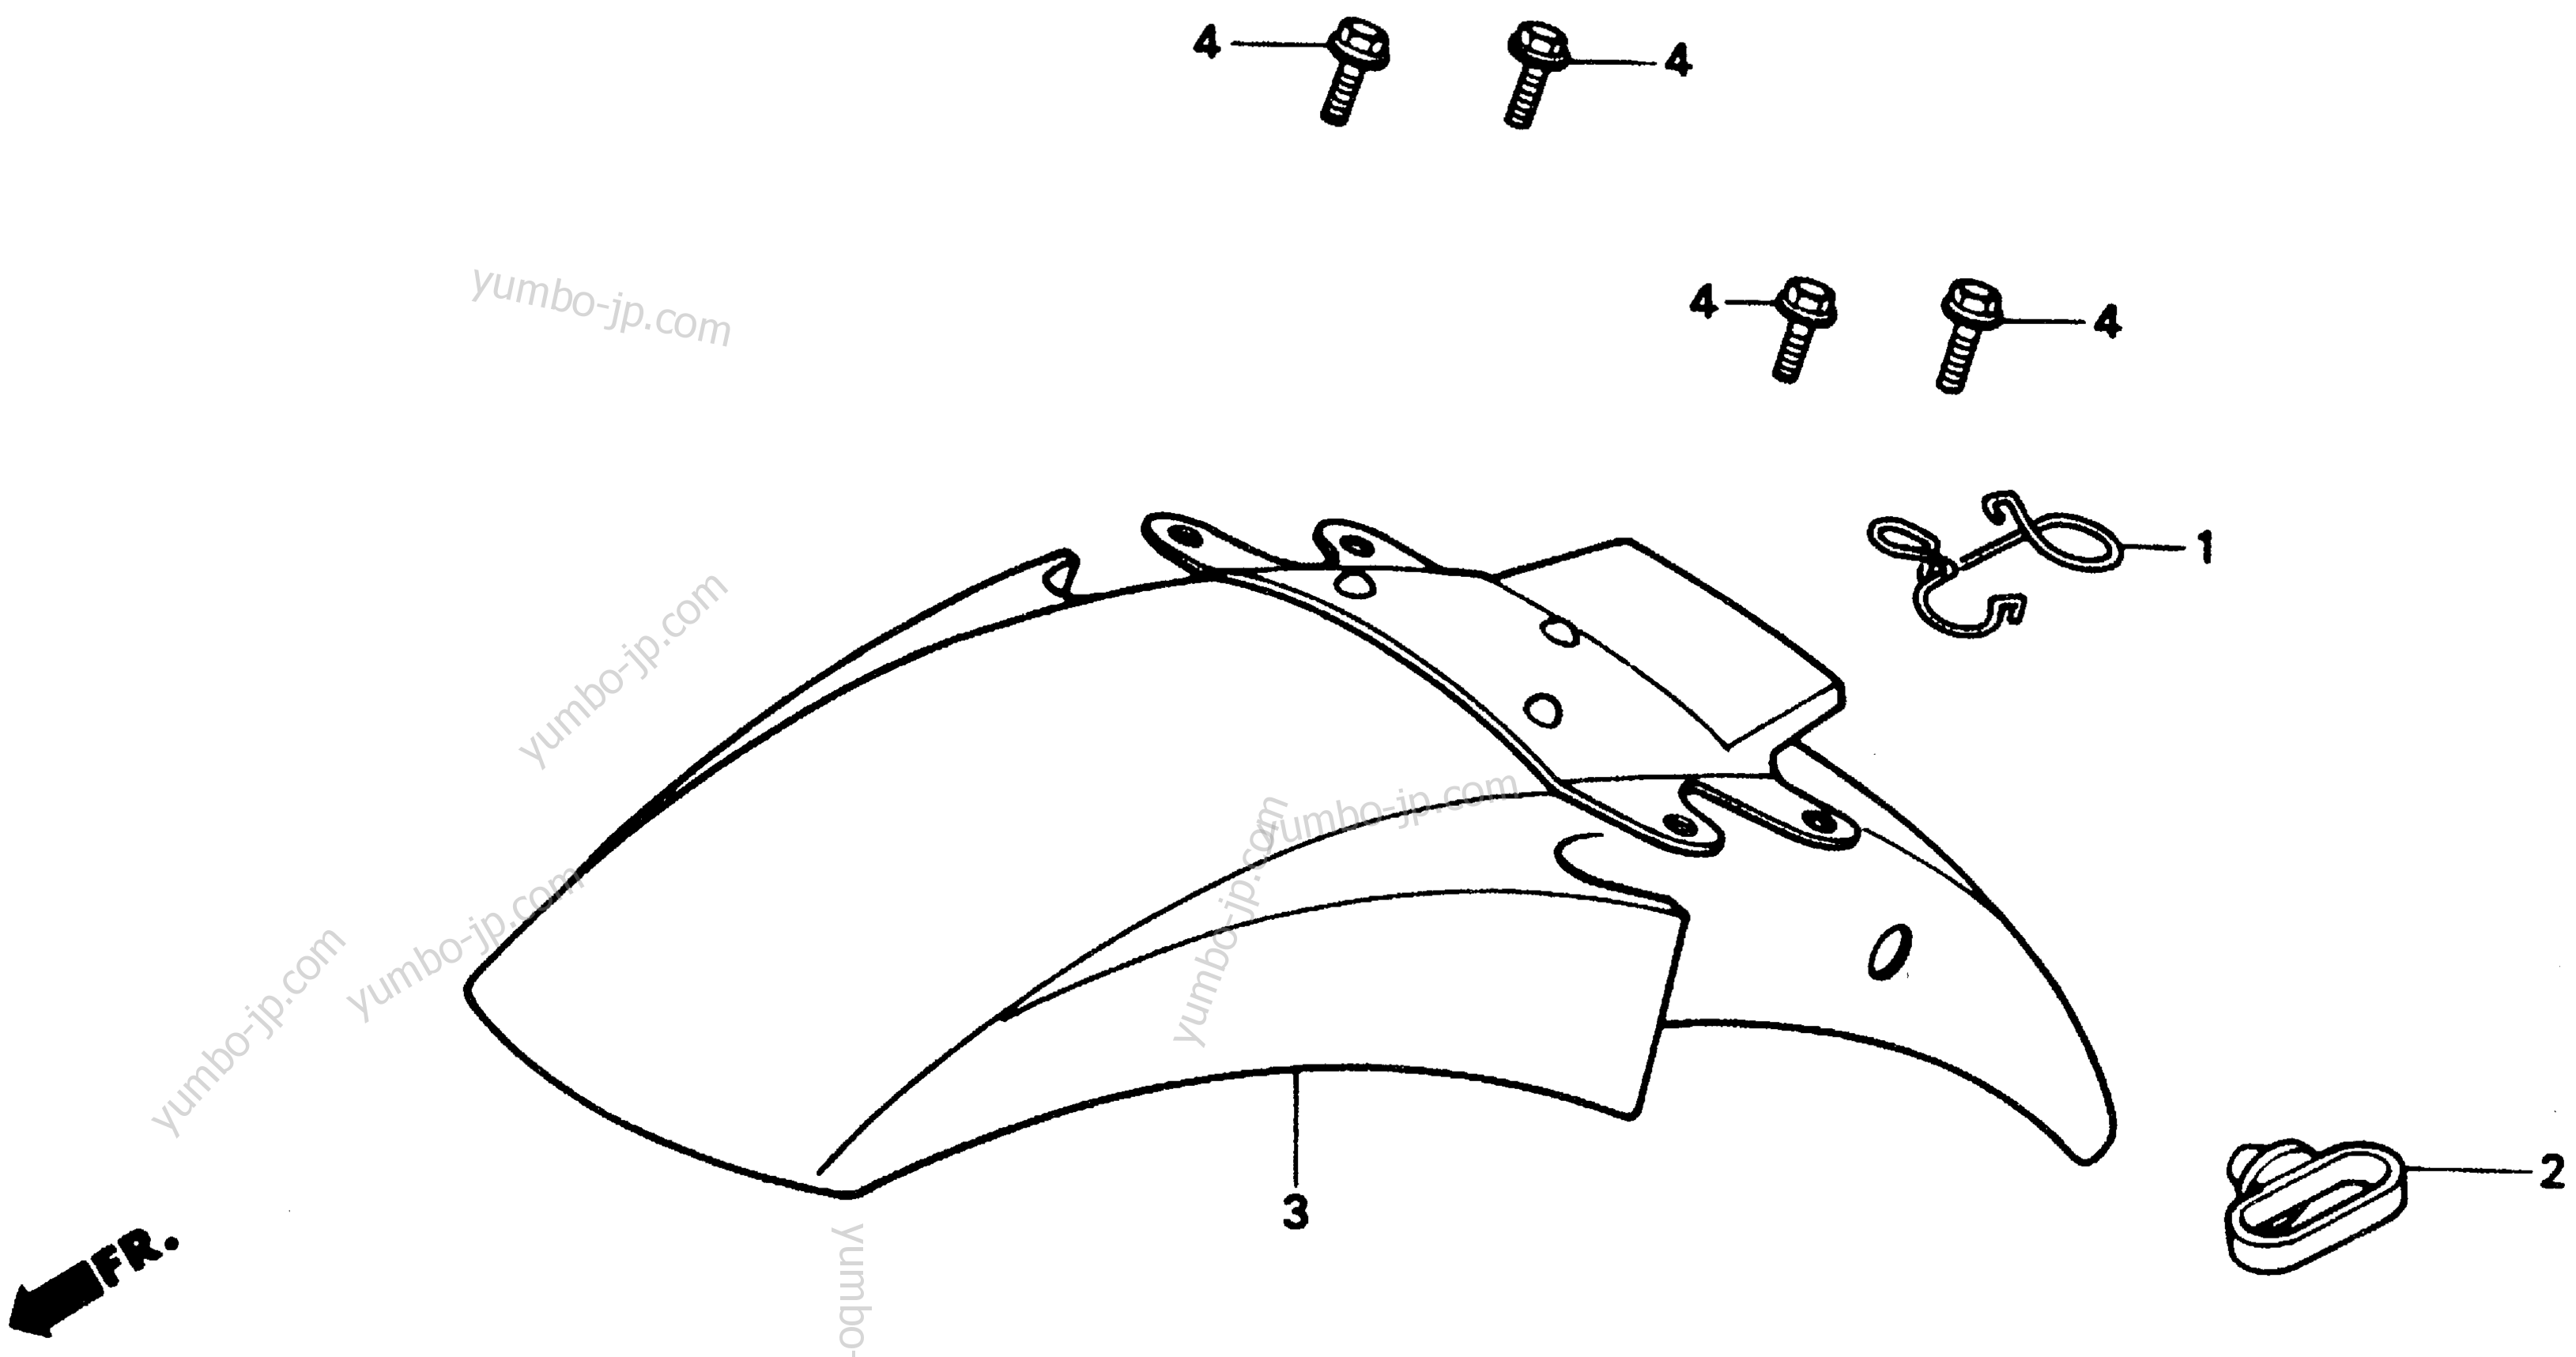 FRONT FENDER for motorcycles HONDA VTR250 AC 1989 year